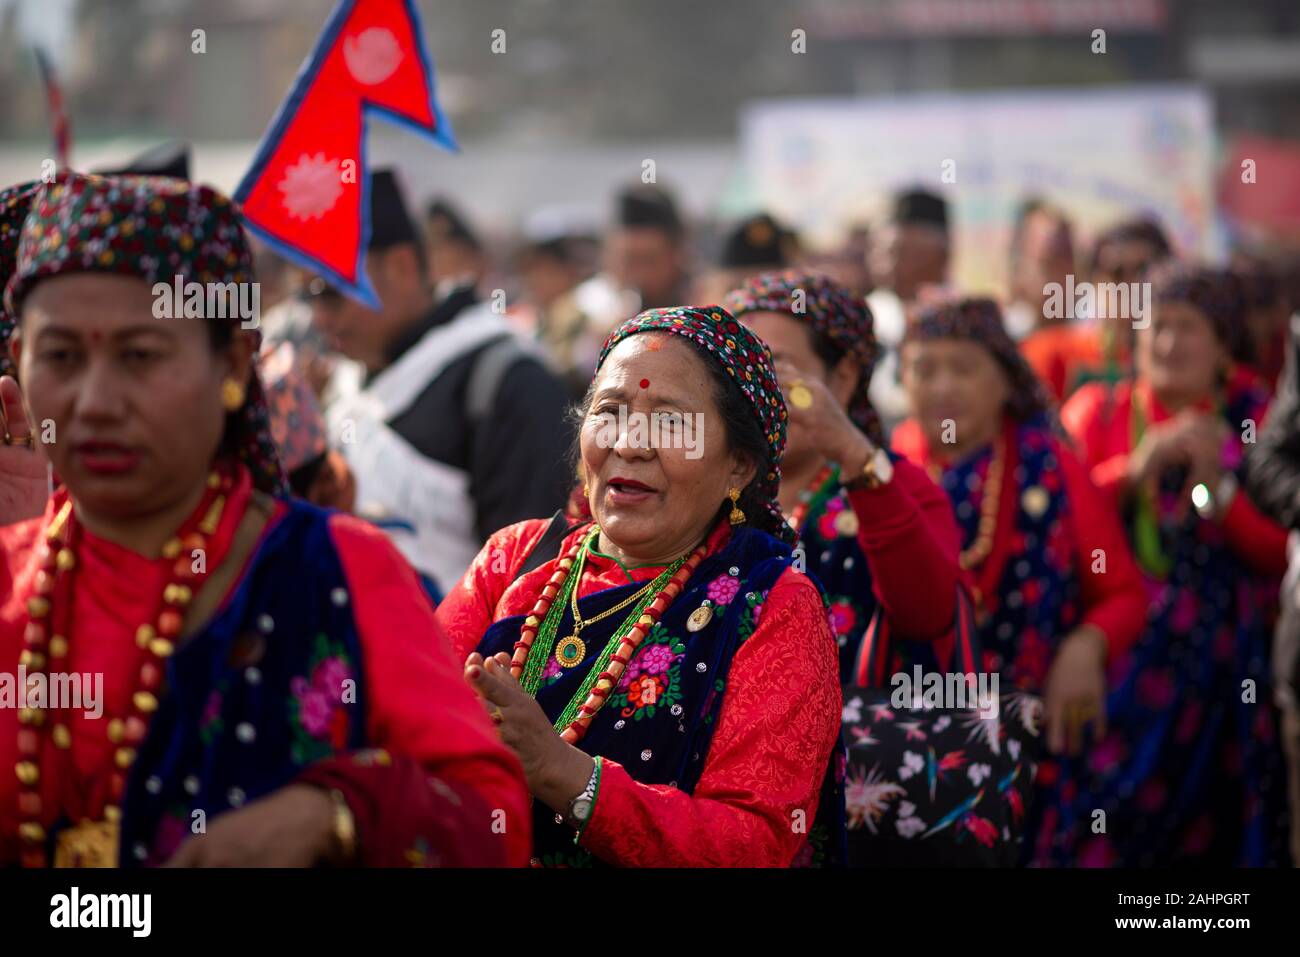 Nepalese women dressed in a traditional attires during the celebration.The Tamu or Gurung people (community) of central Nepal celebrate their new year annually on the public holiday called “Tamu Losar”. This is a time of great family gatherings, feasts, and joyful cultural events. The holiday is based on local calendar systems, but tends to fall near the end of December, not far from Gregorian New Year’s Day. Stock Photo